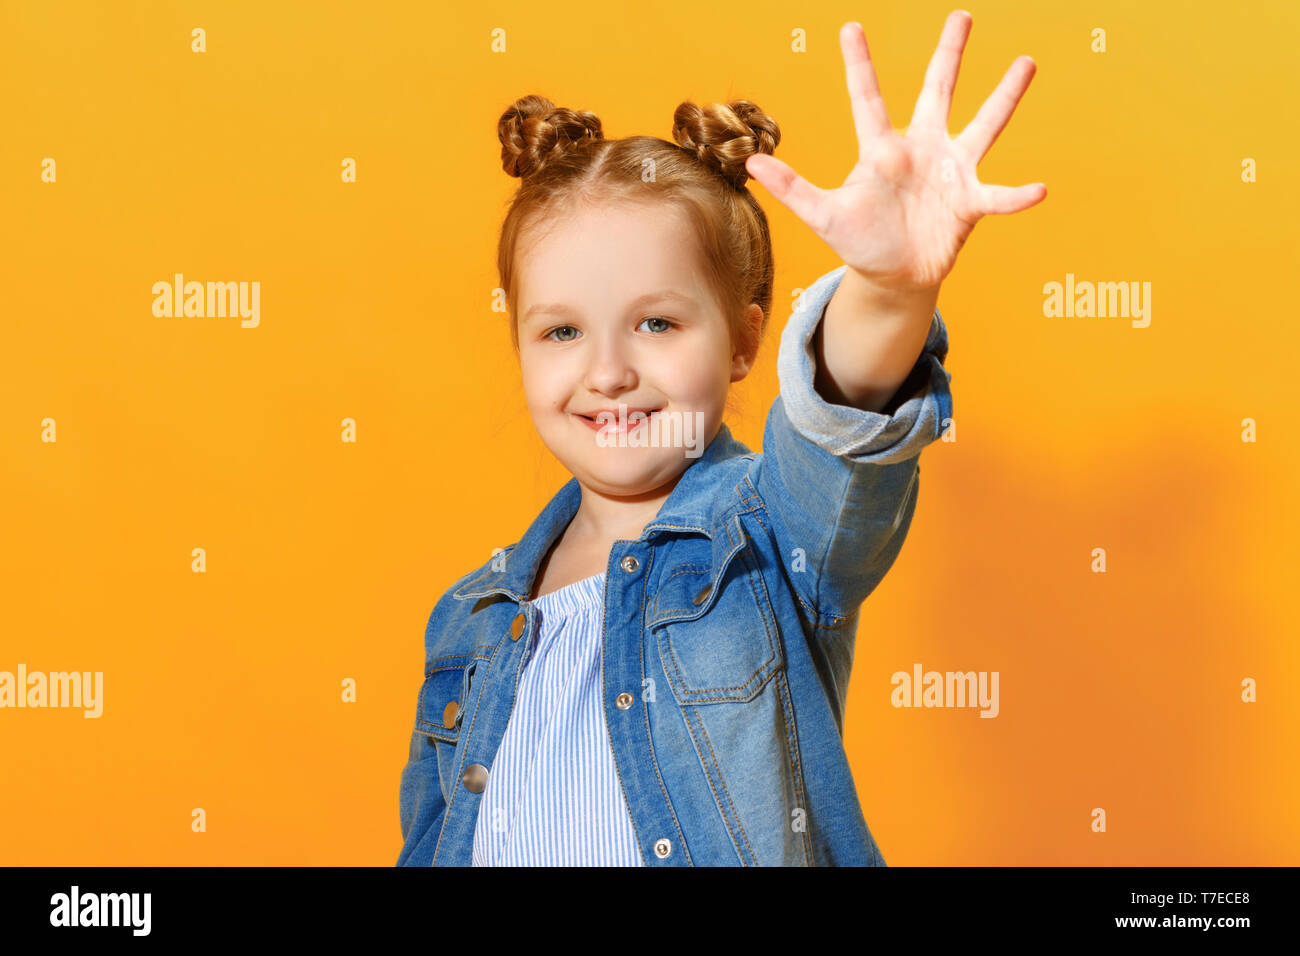 Portrait of a funny little girl on a yellow background. Preschool child shows the palm, give five. Stock Photo